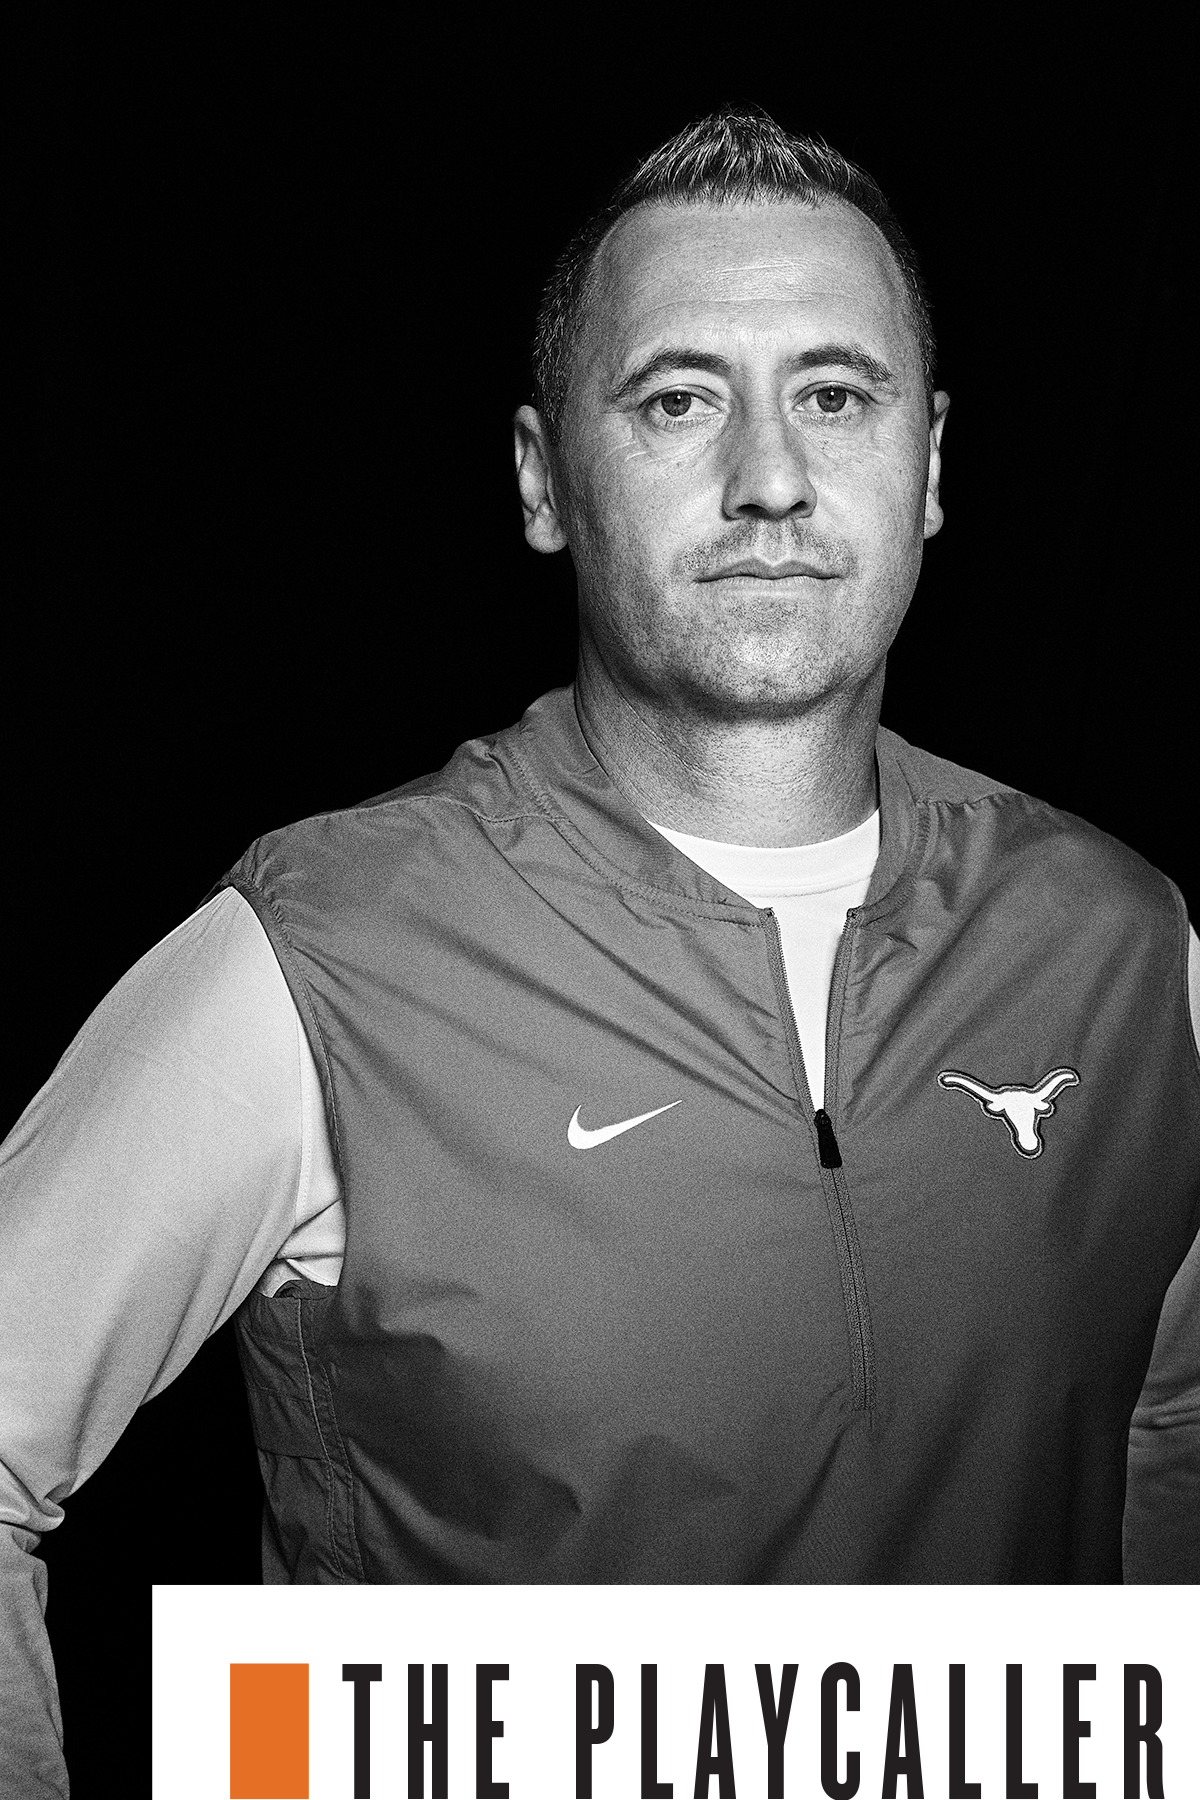 Here's how much UT-Austin is paying football coach Steve Sarkisian